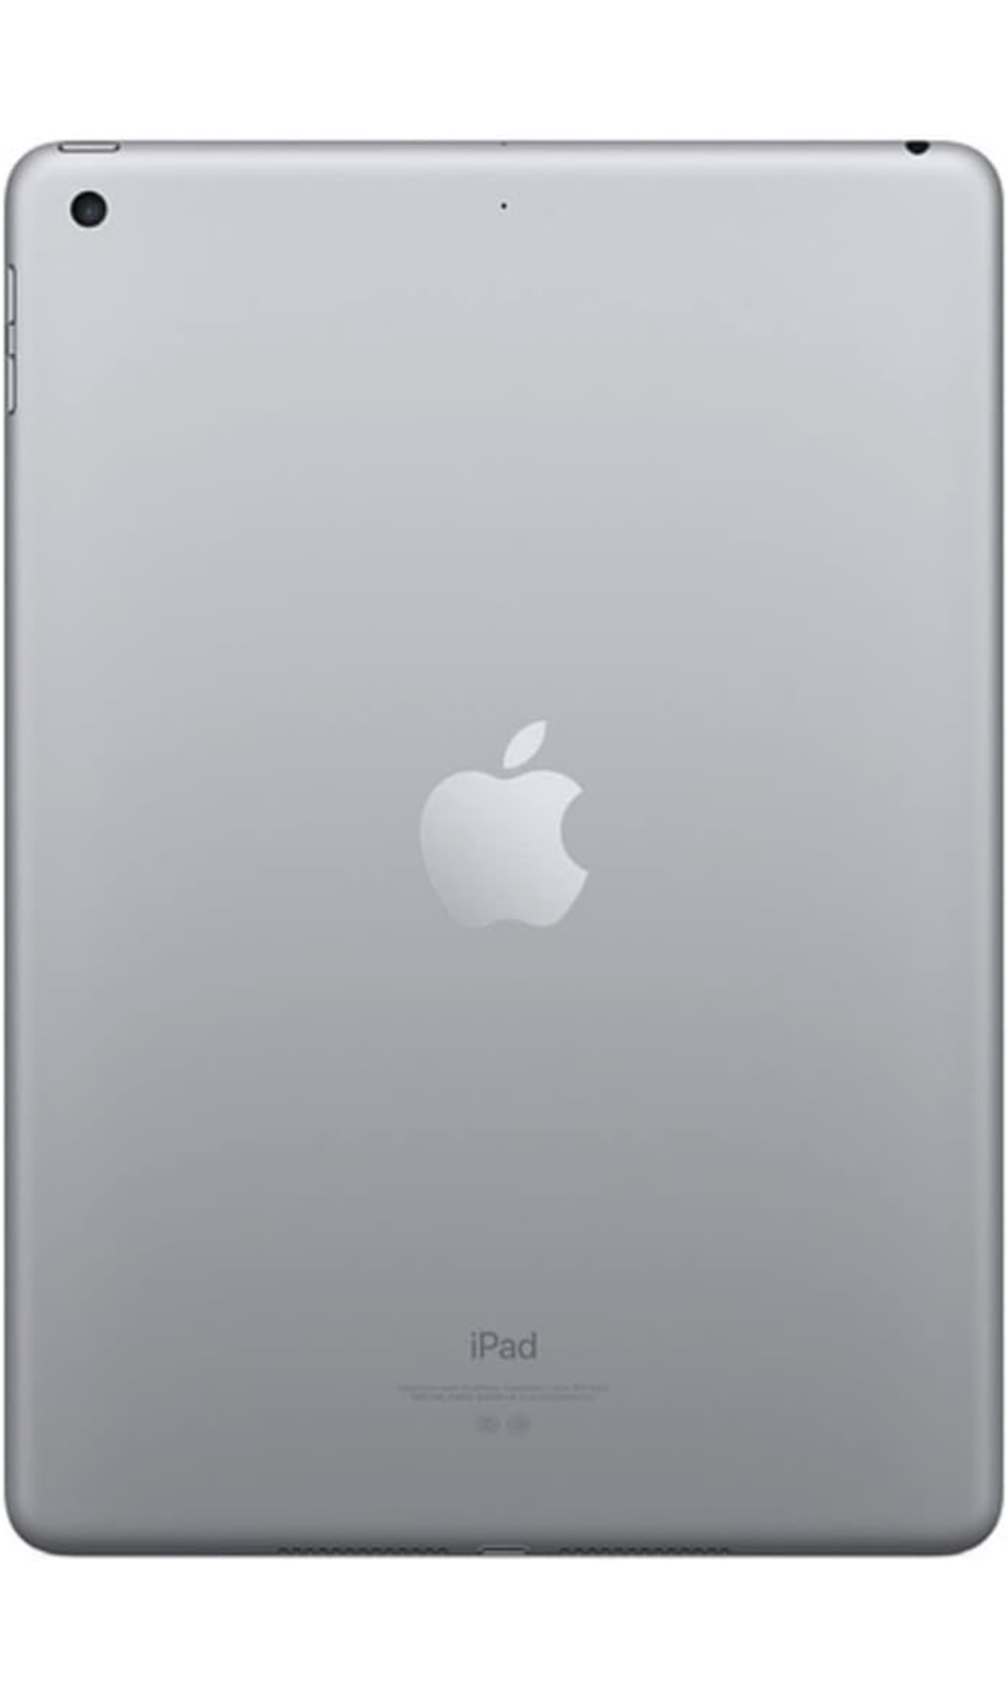 Apple iPad (2018 Model) with Wi-Fi only | 32GB | Apple 9.7in iPad | Space Gray (Renewed renovado tablet